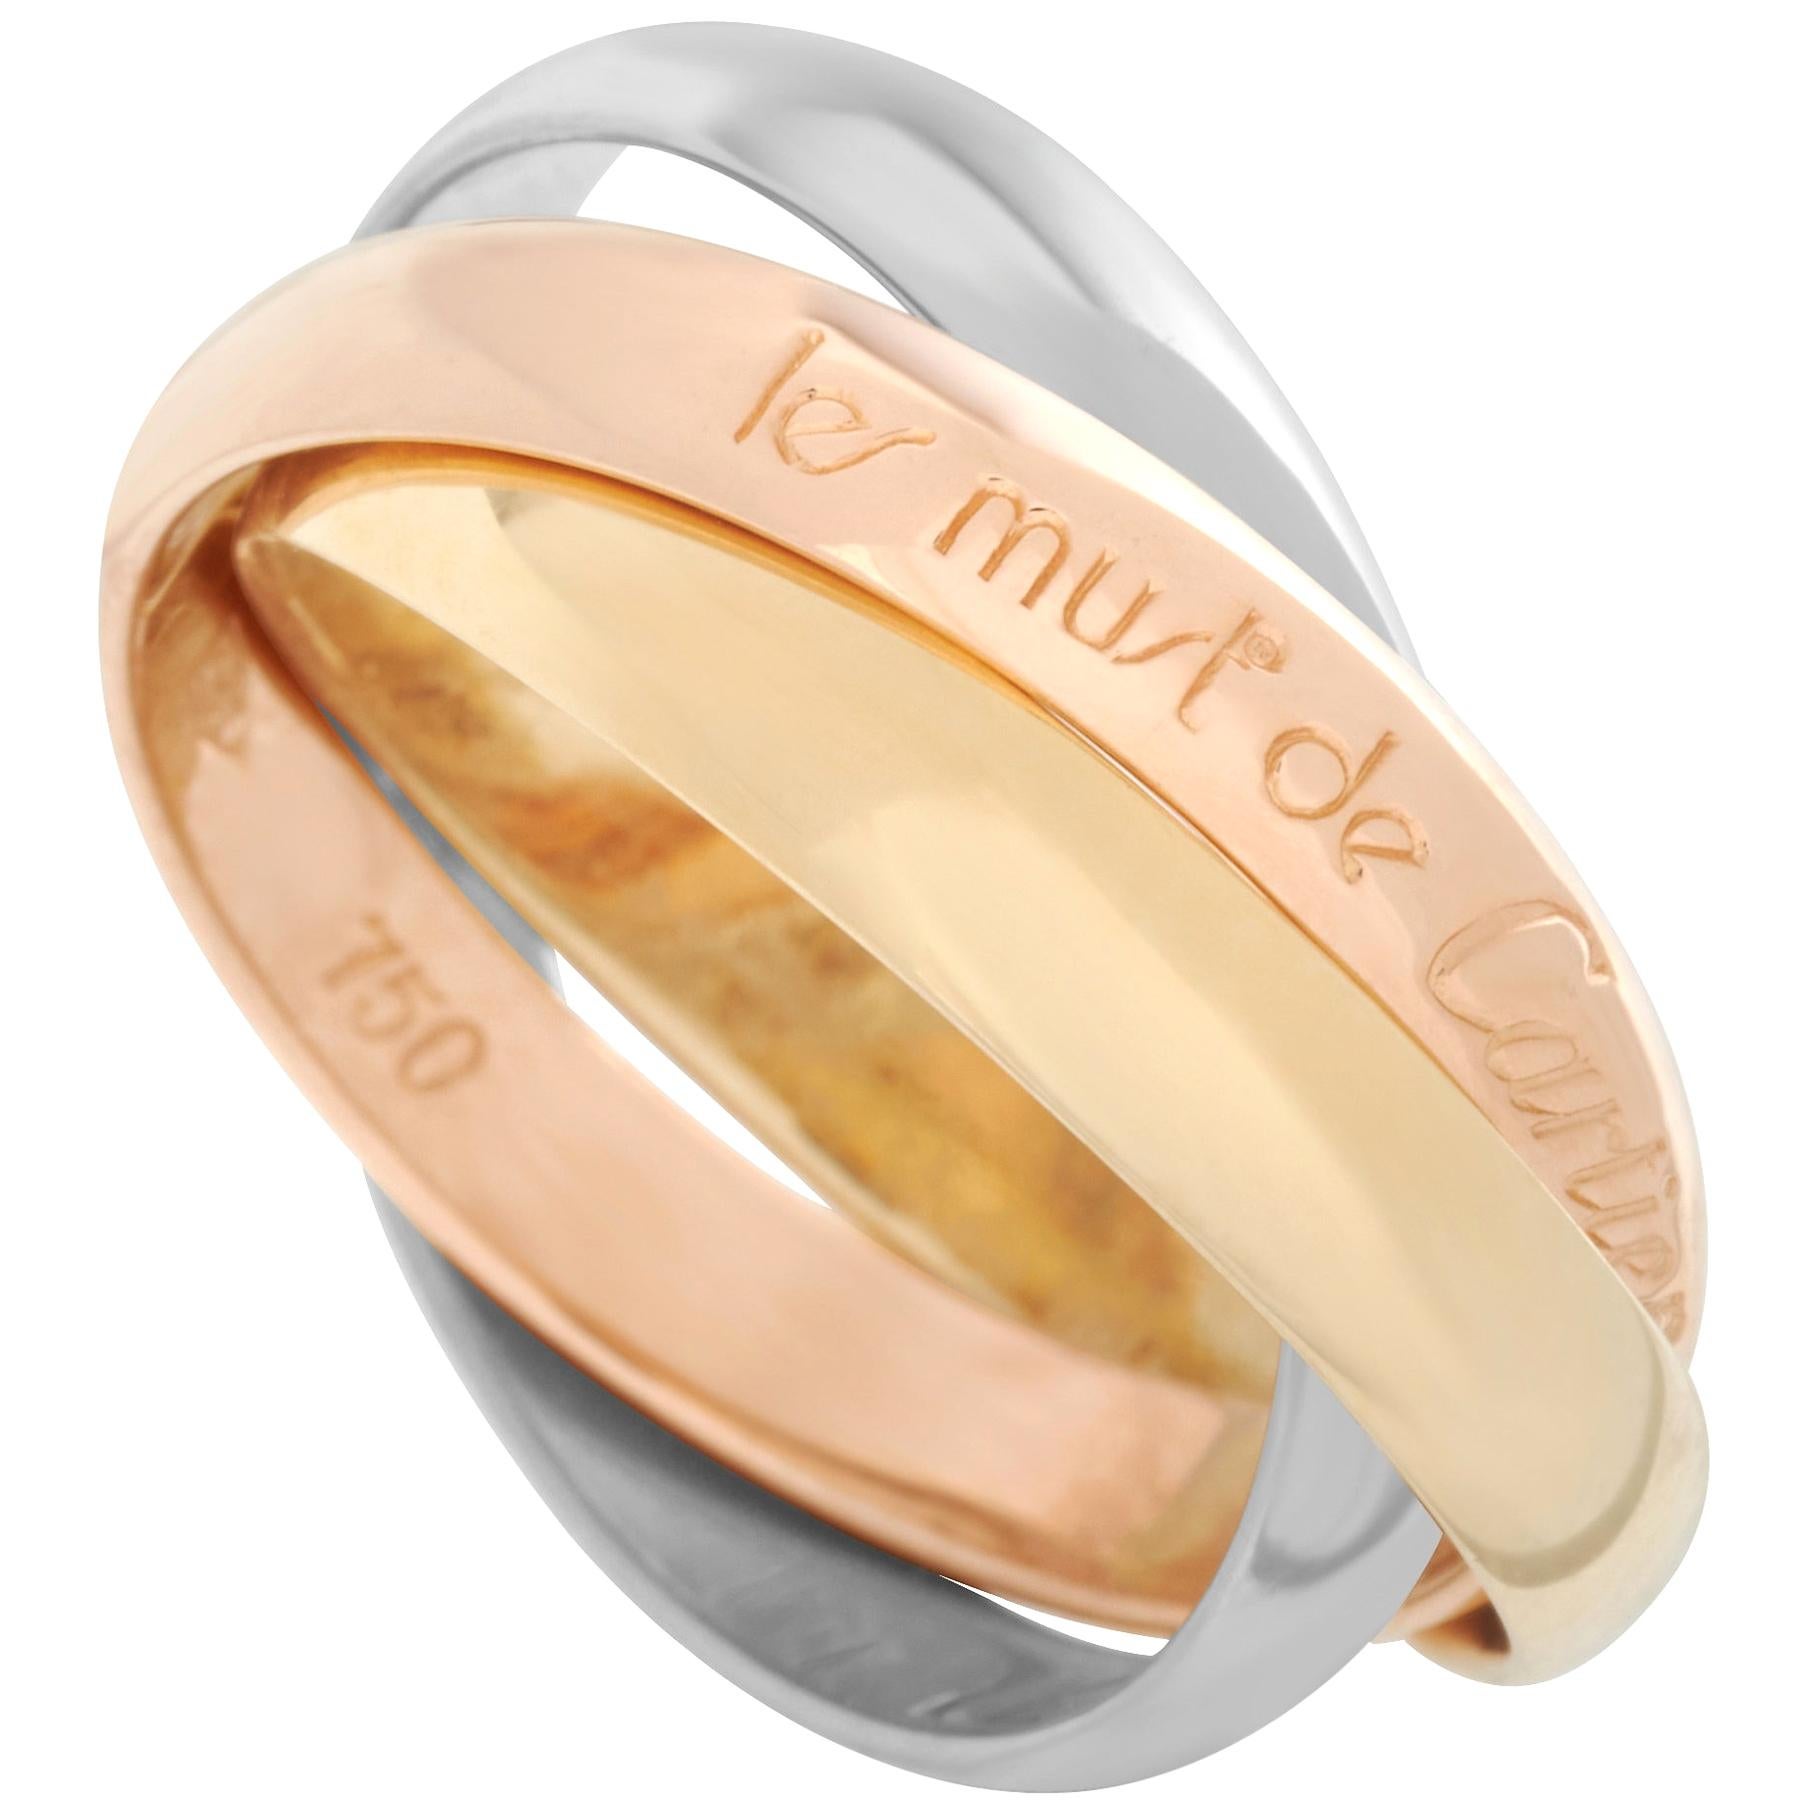 Cartier Trinity 18 Karat Yellow, White and Rose Gold Ring